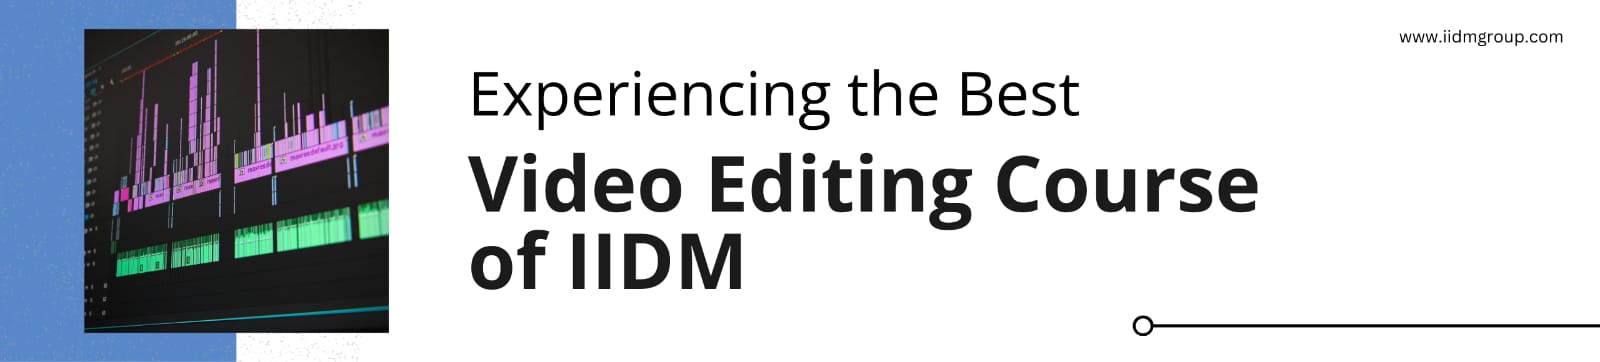 Art of Editing: Experiencing the Best Video Editing Course of IIDM